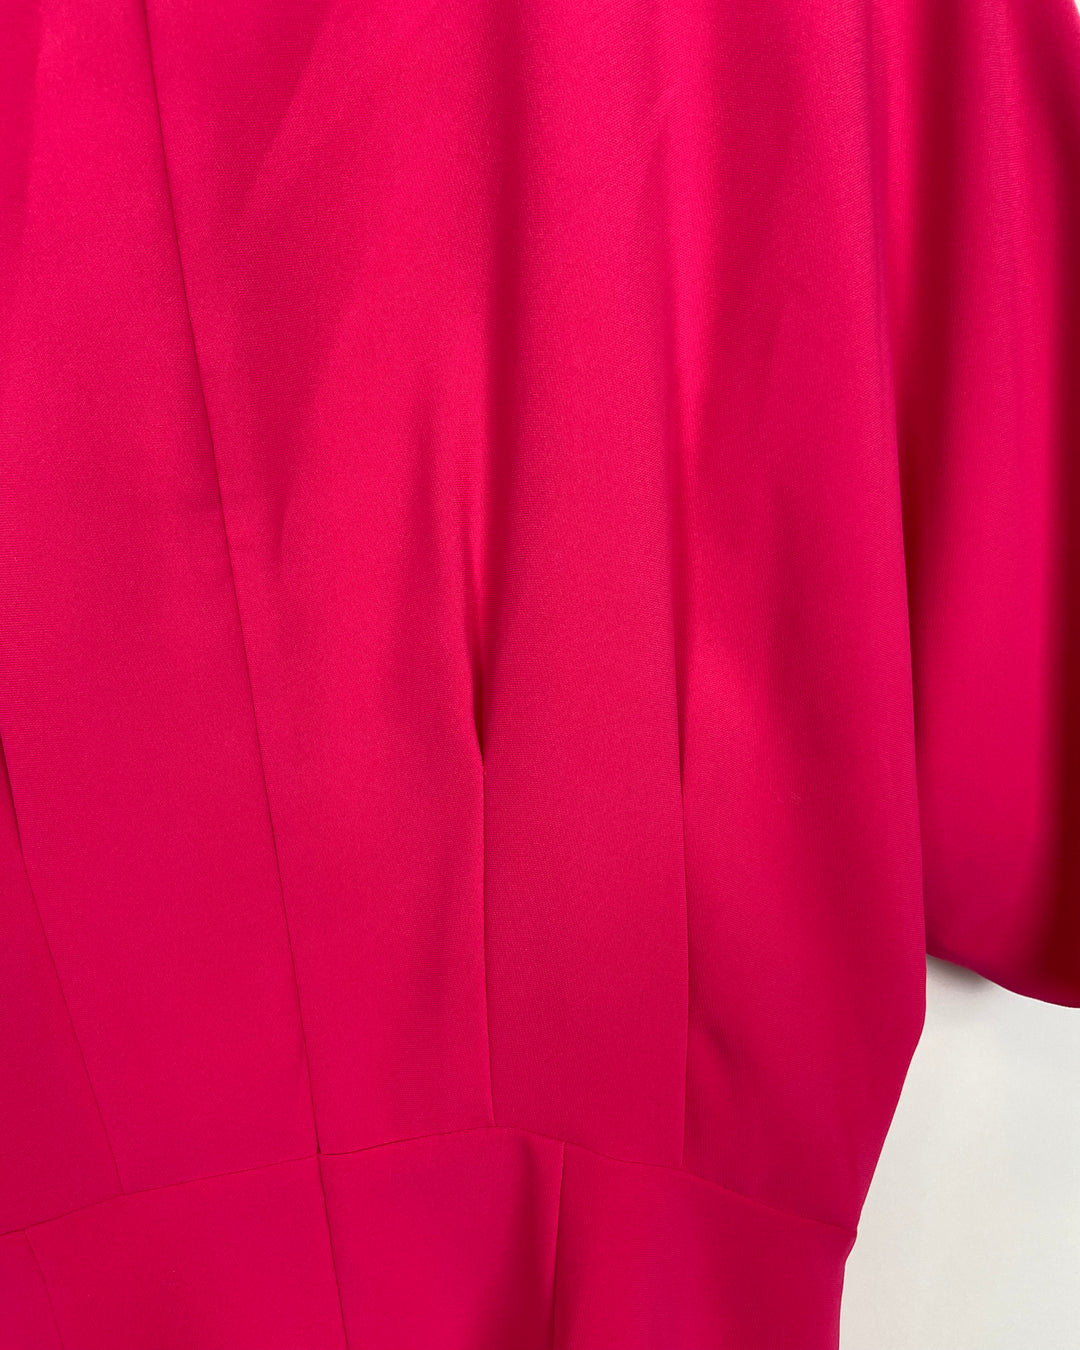 Hot Pink Blouse - Size 4-6